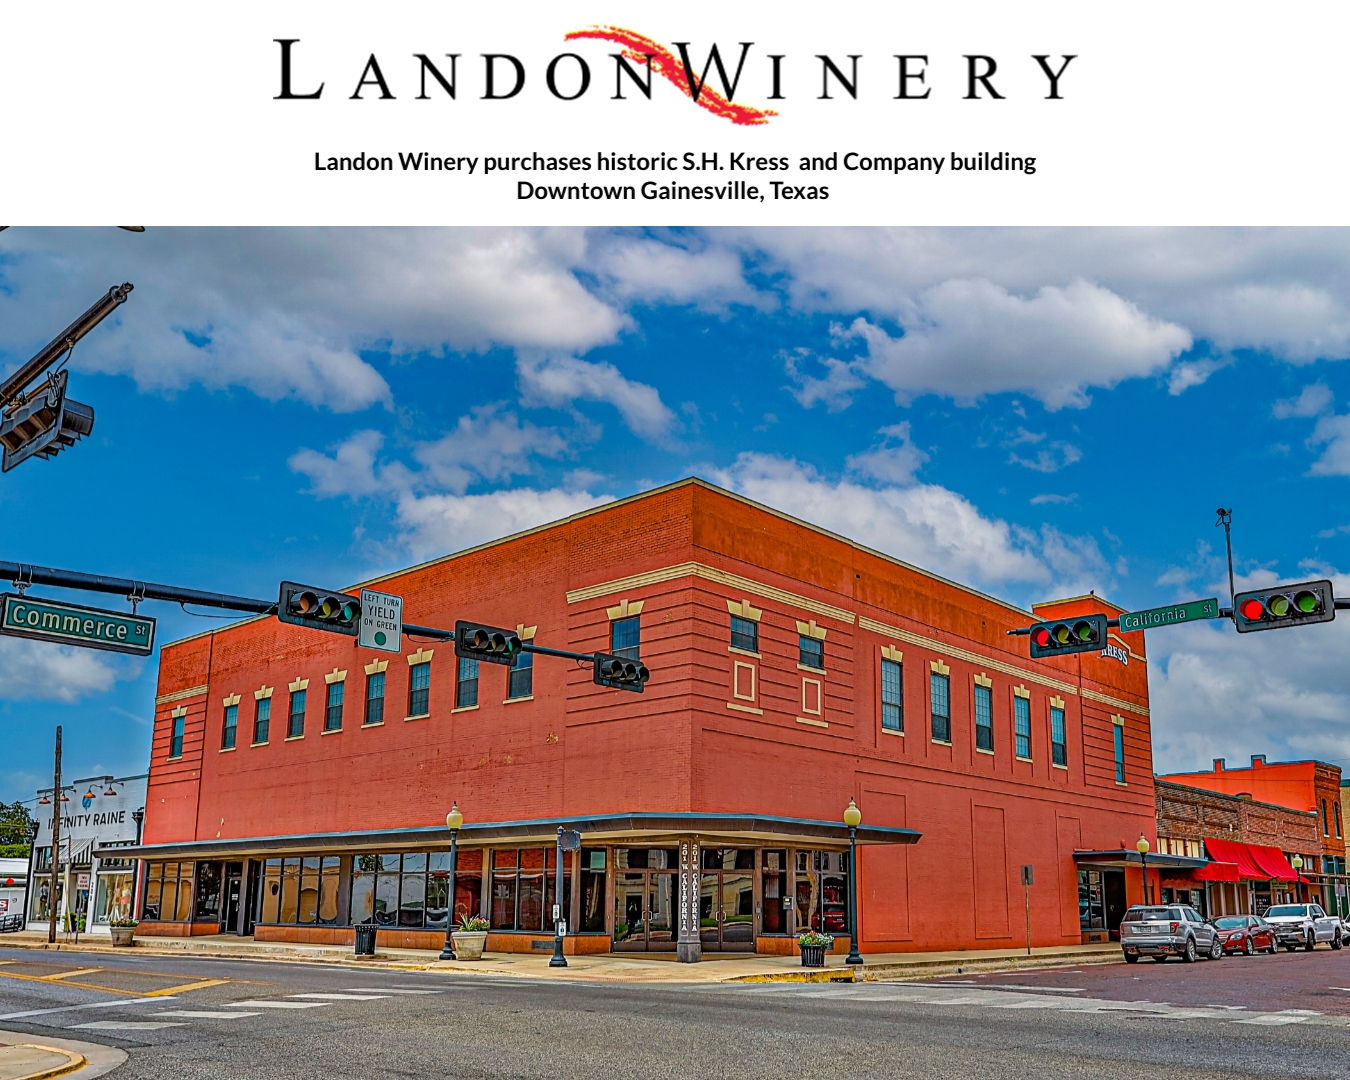 LANDON WINERY PURCHASES HISTORIC S.H. KRESS AND COMPANY BUILDING IN GAINESVILLE, TX Photo